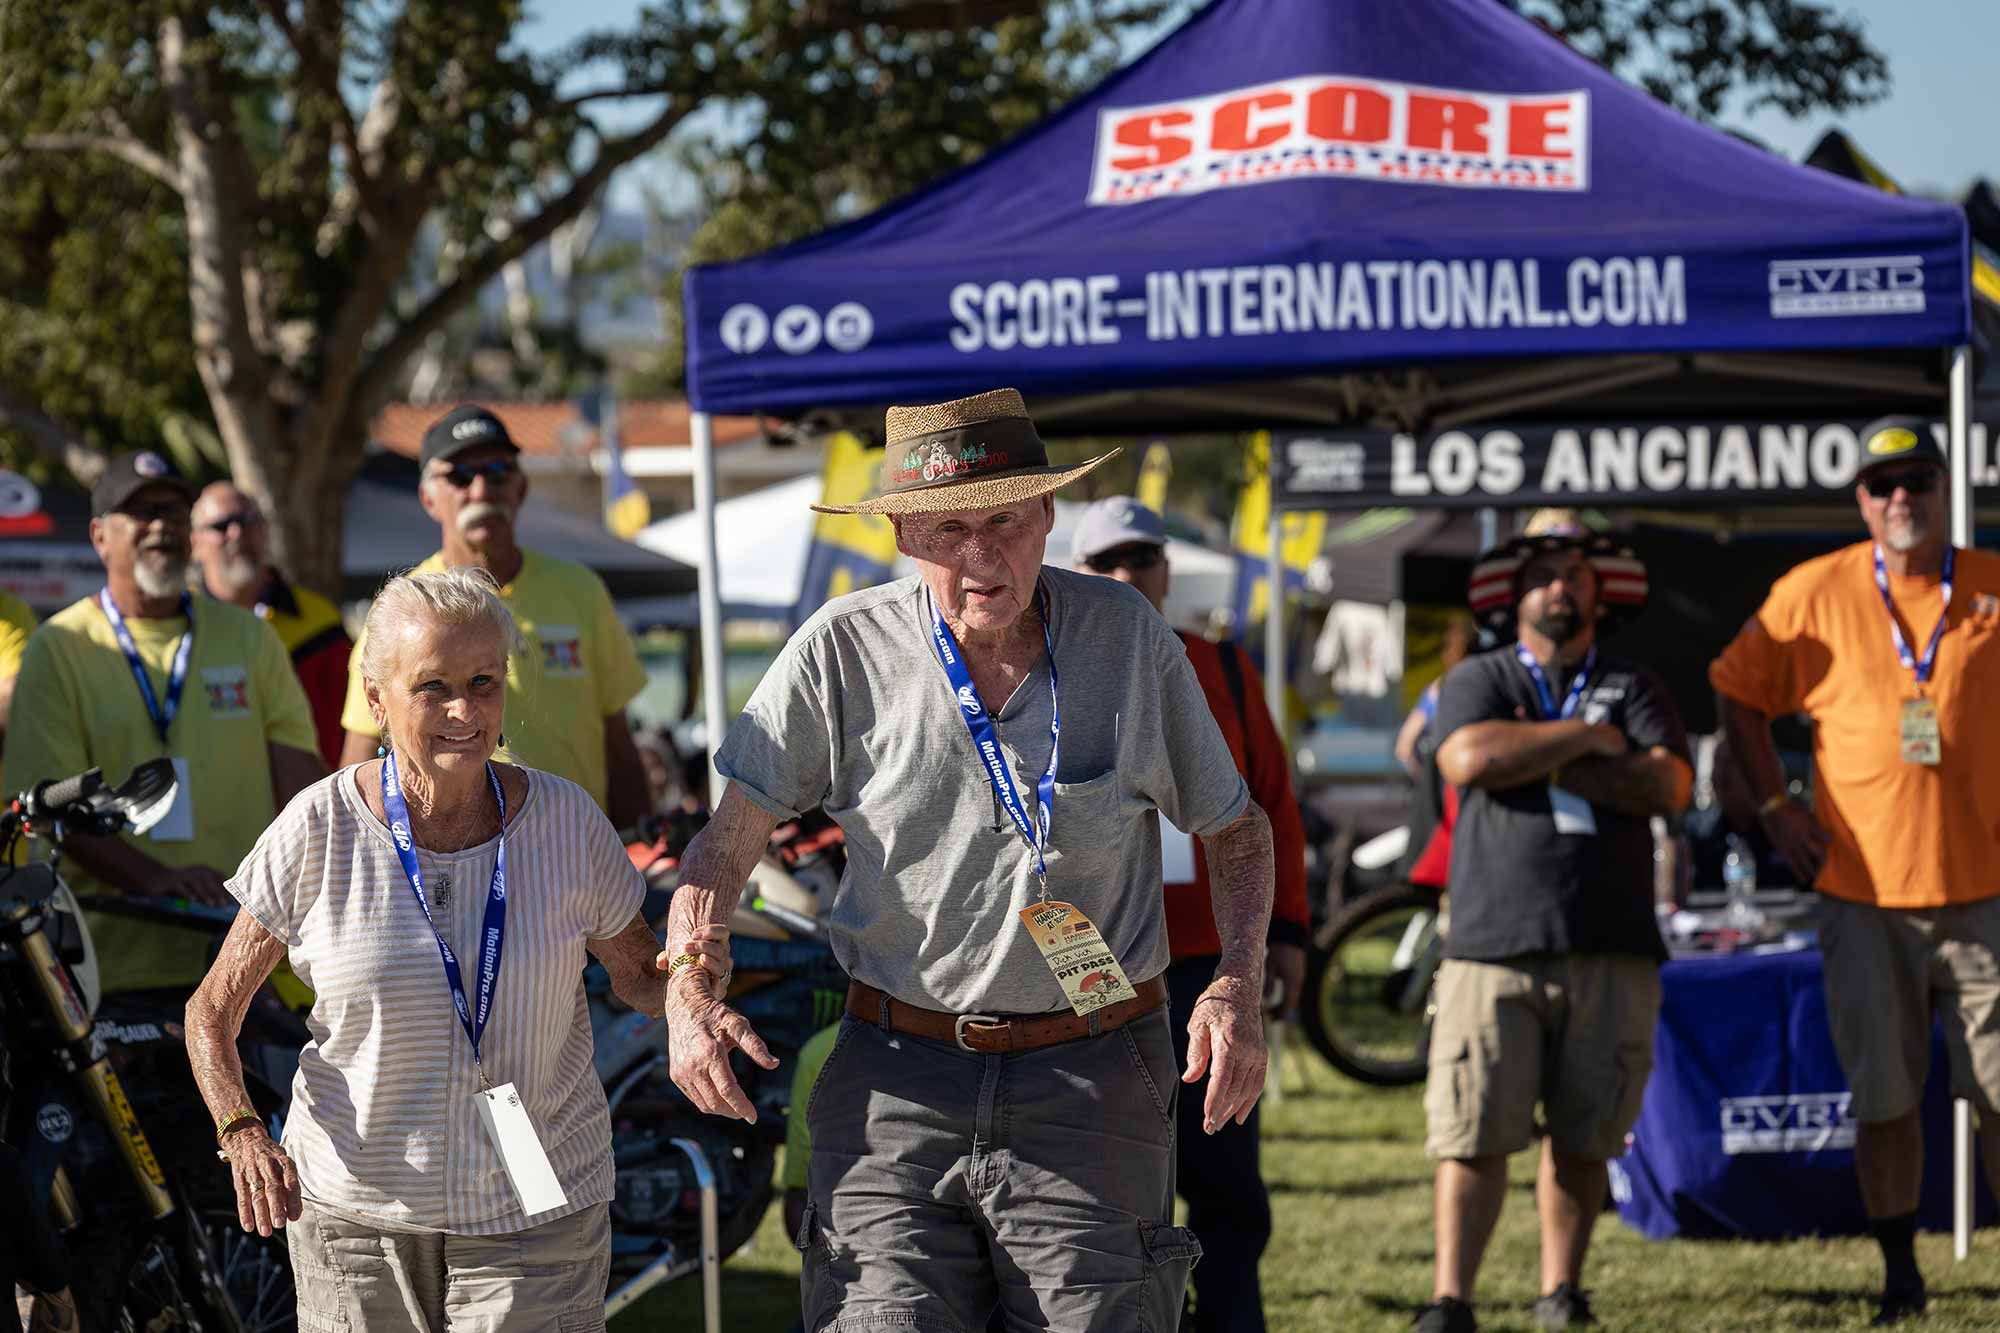 At 92 years young, Dick Vick, a childhood hero of Johnny Campbell’s, came out to accept his award as a Certified Legend of desert racing.